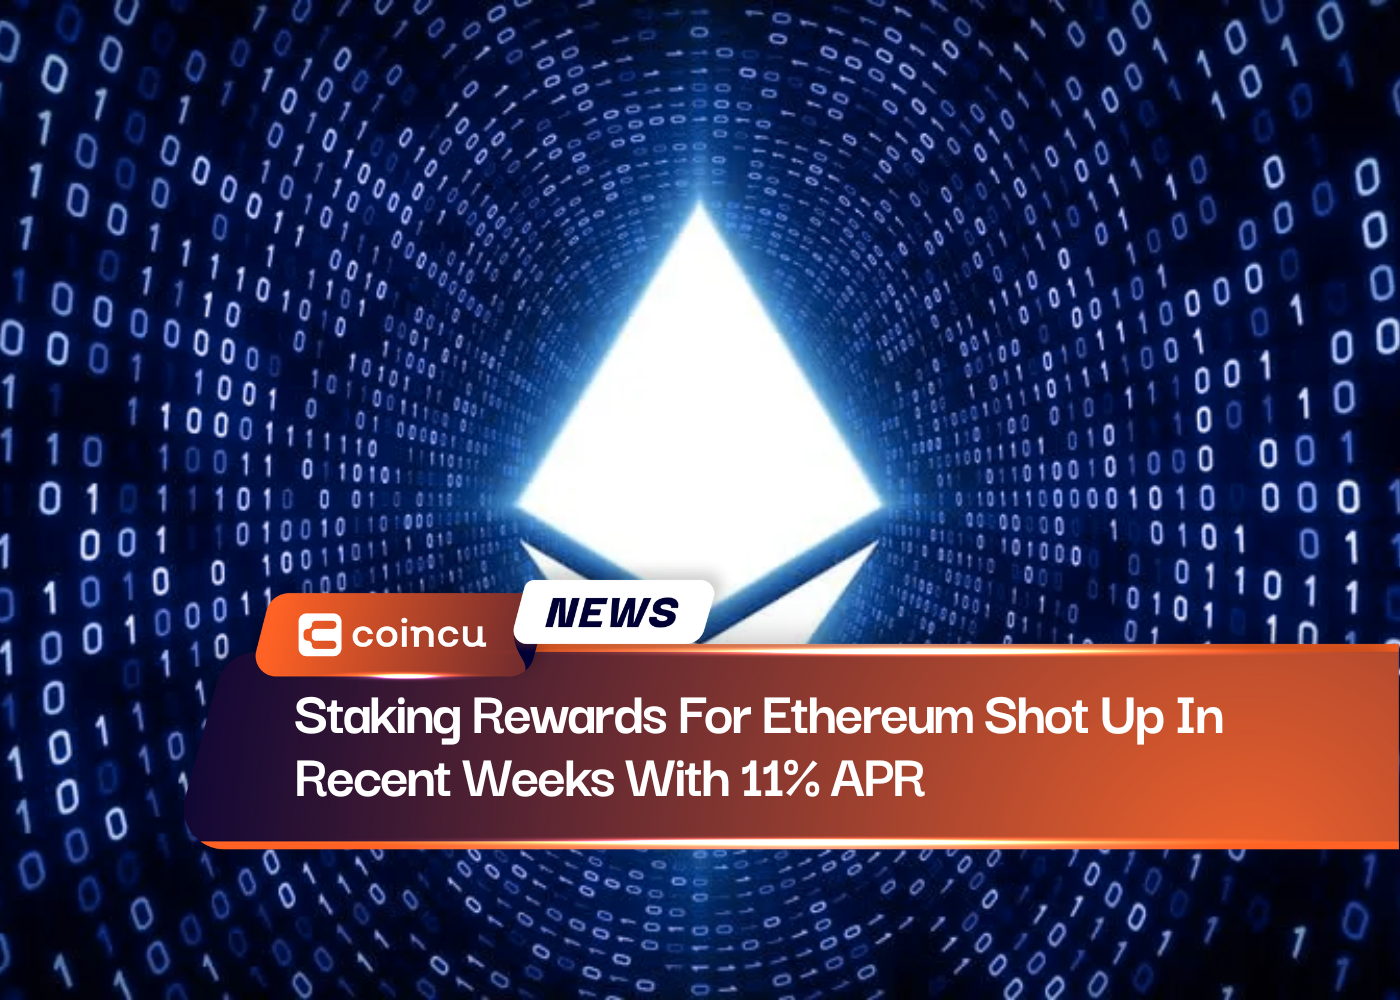 Staking Rewards For Ethereum Shot Up In Recent Weeks With 11% APR